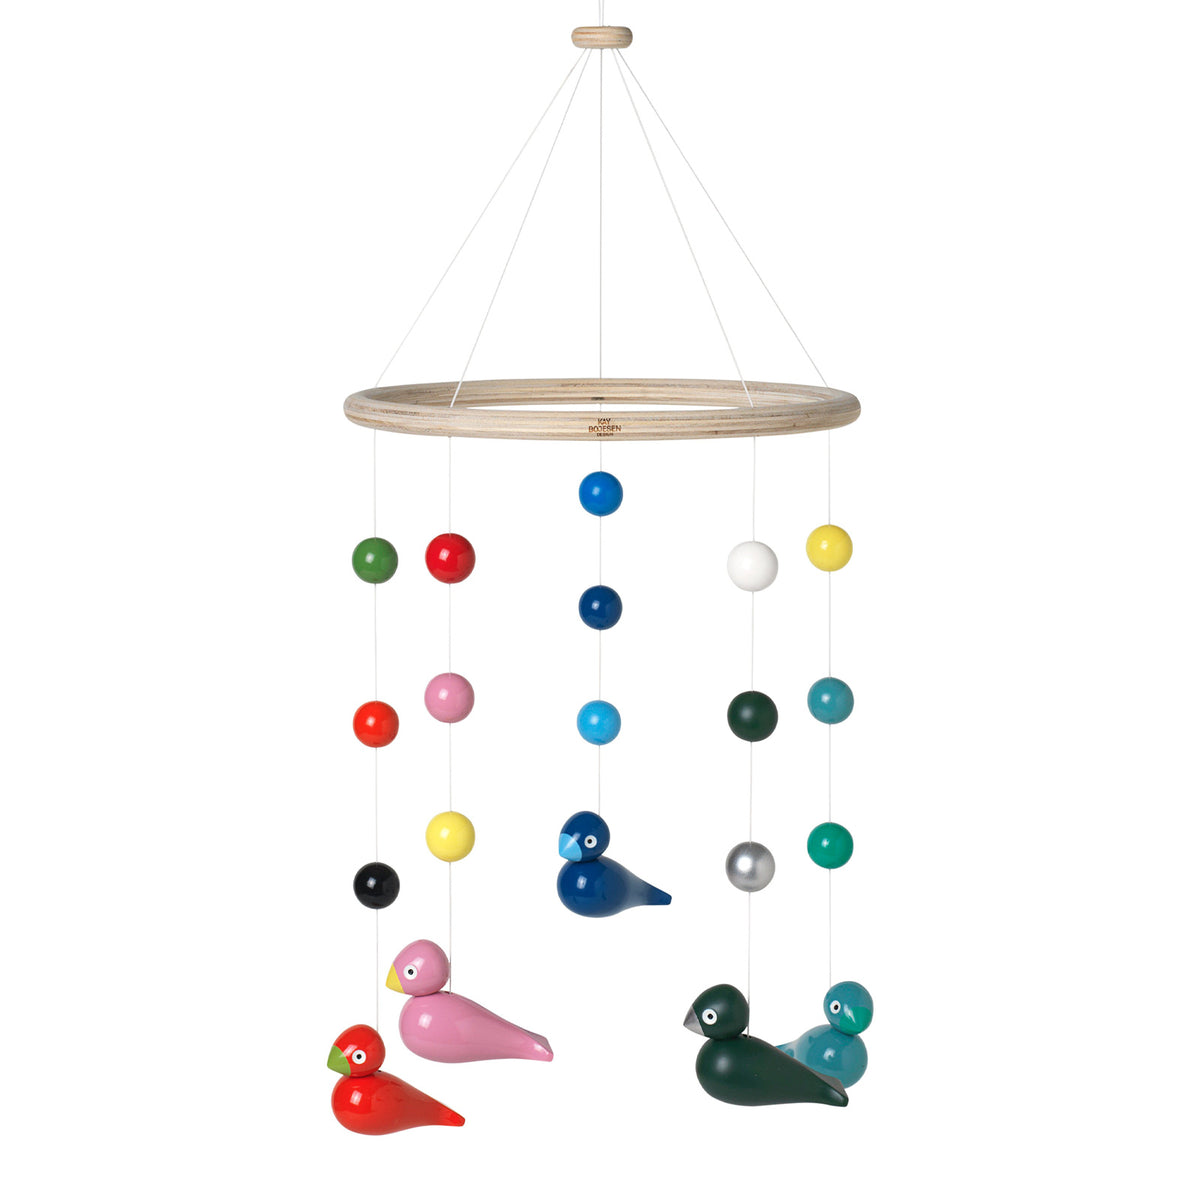 The Kay Bojesen Songbirds Mobile: Multi-color assembled and hanging.